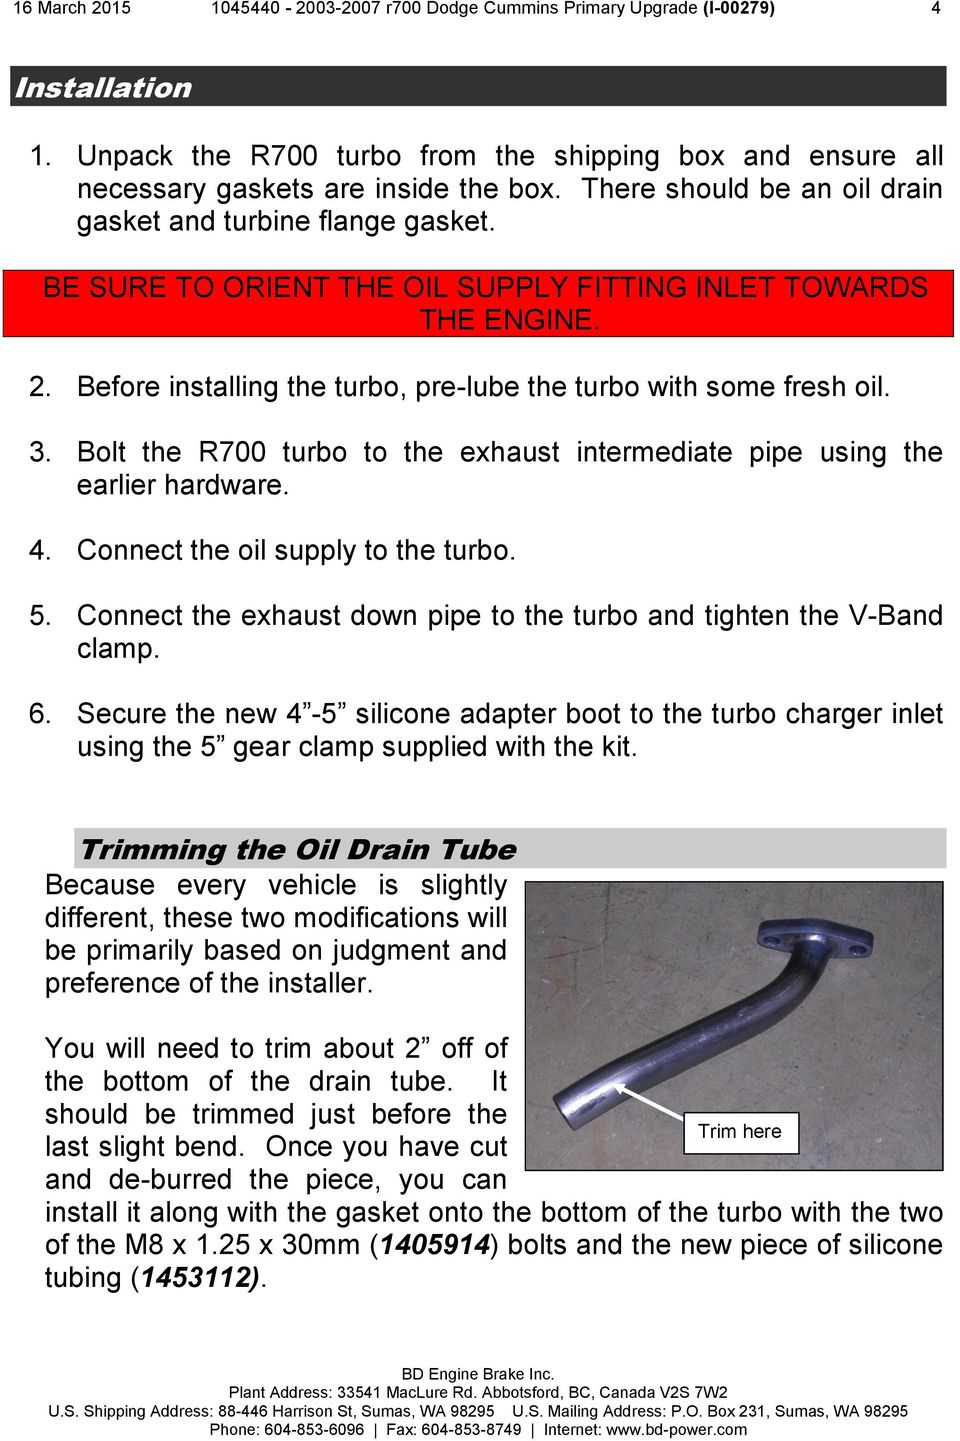 Before installing the turbo, pre-lube the turbo with some fresh oil. 3. Bolt the R700 turbo to the exhaust intermediate pipe using the earlier hardware. 4. Connect the oil supply to the turbo. 5.